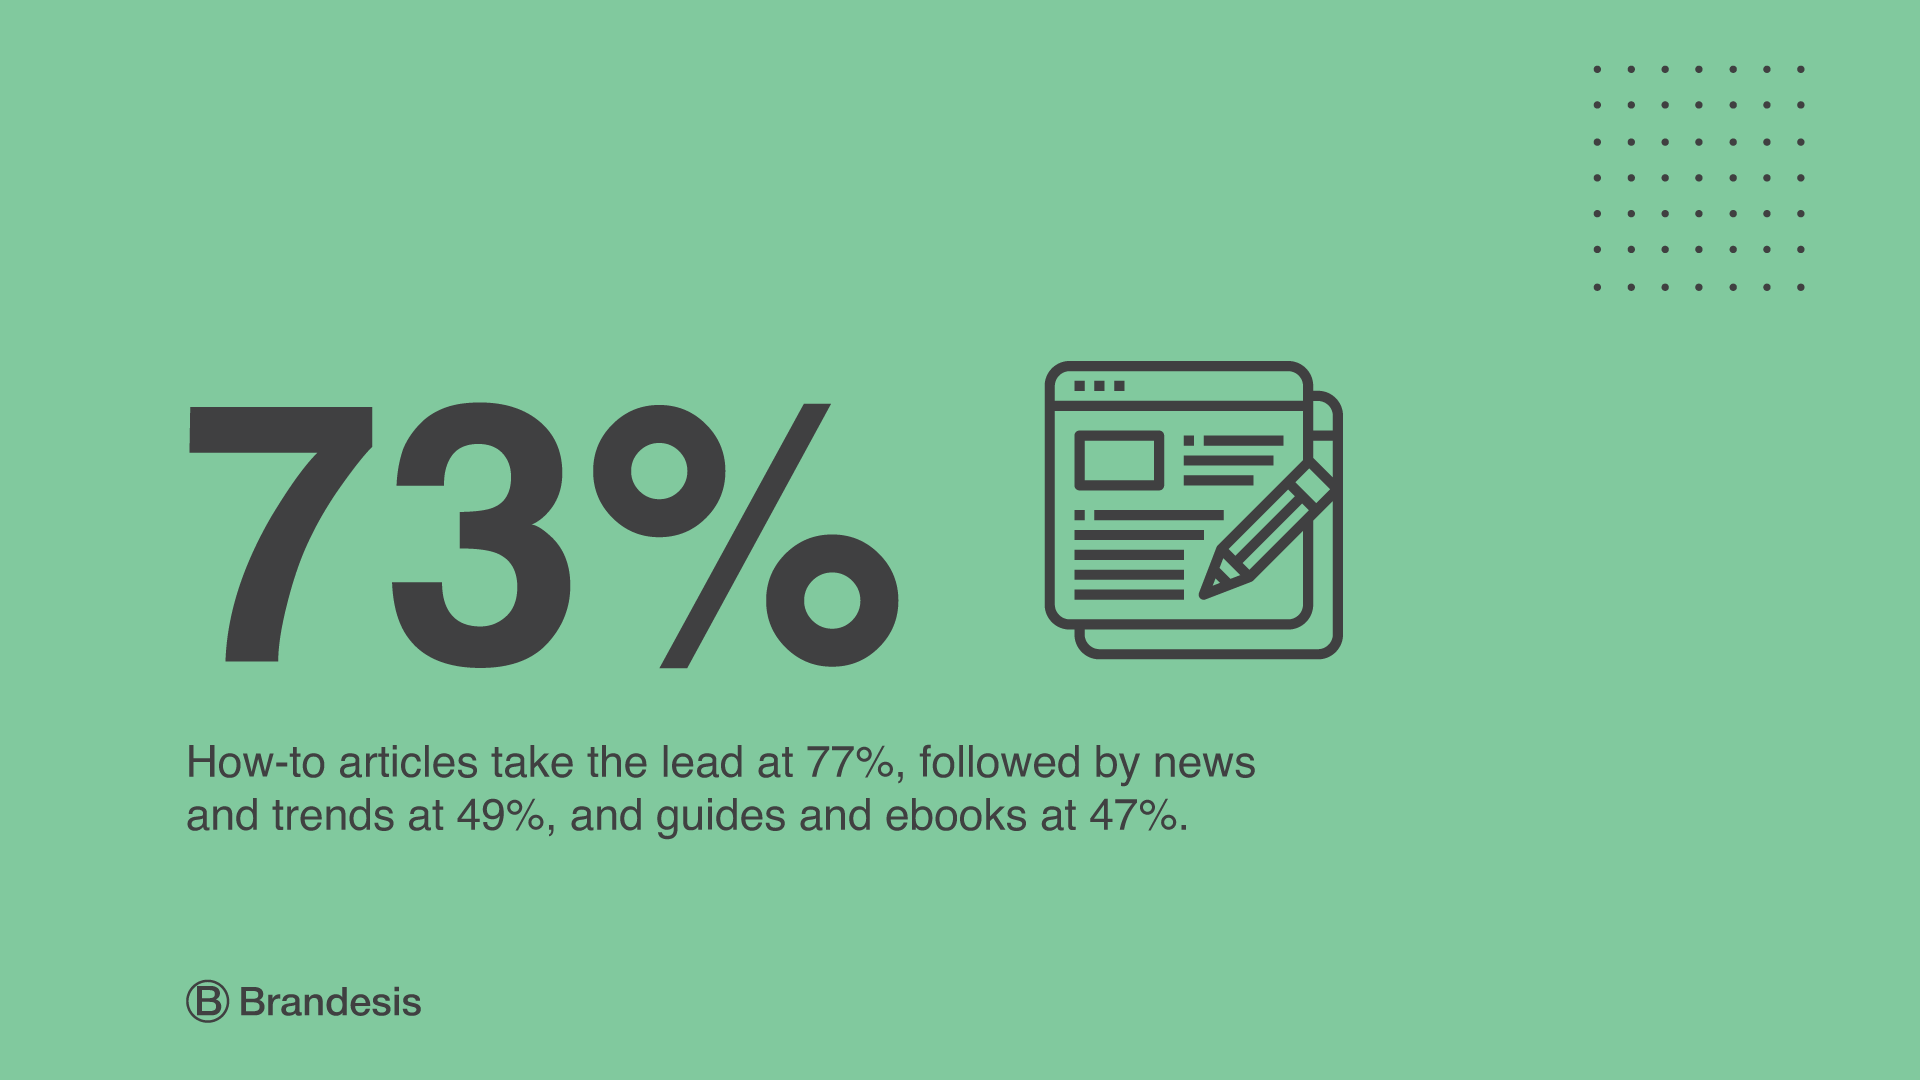 How-to articles take the lead at 77%, followed by news and trends at 49%, and guides and ebooks at 47%.